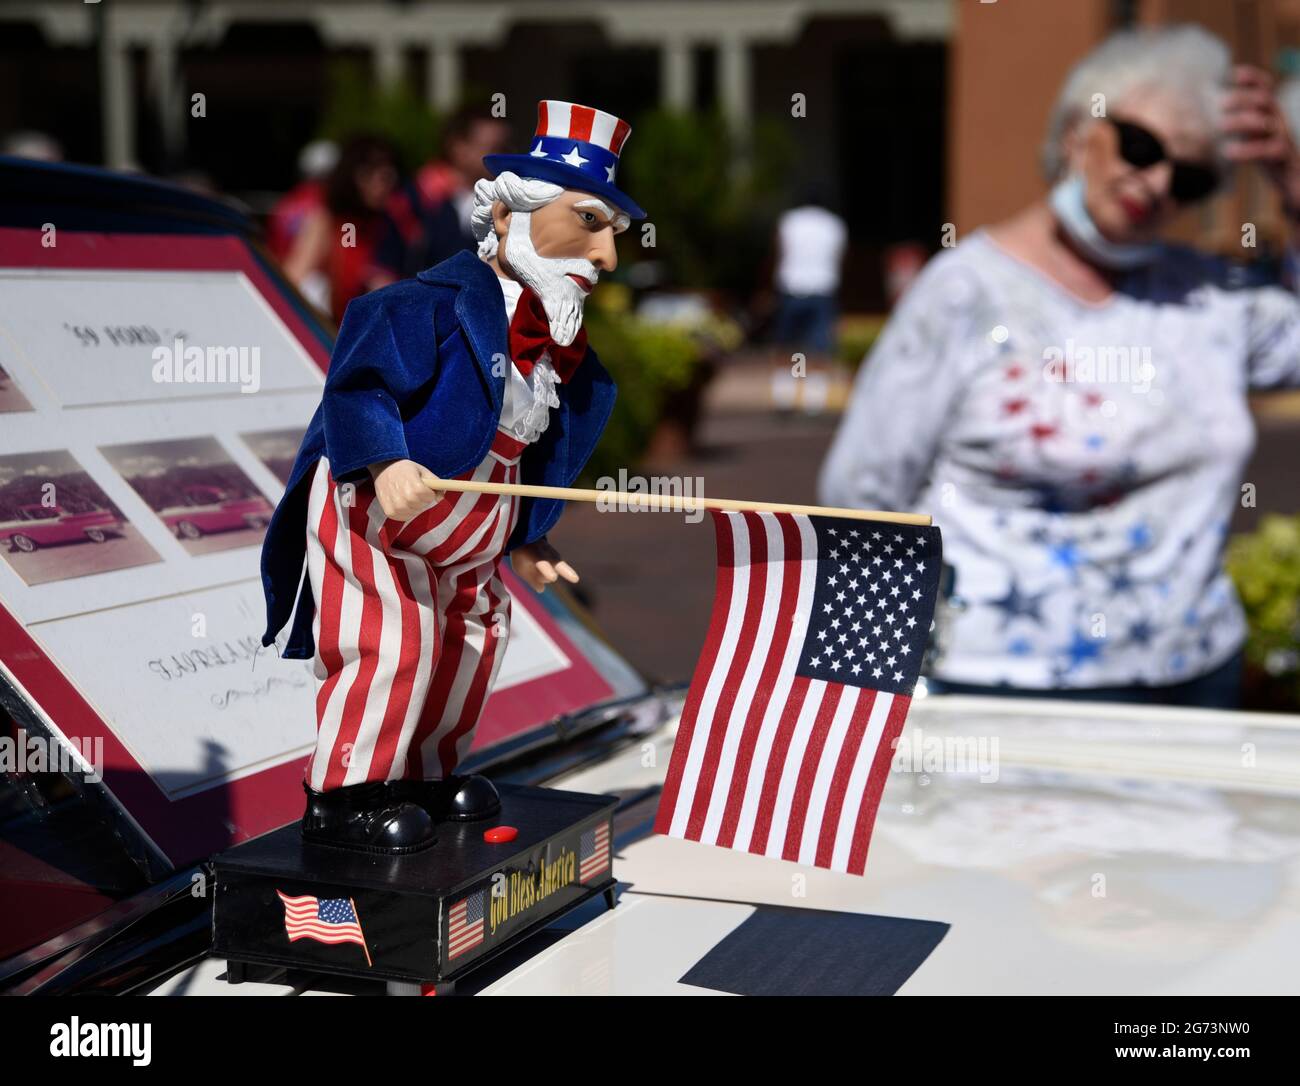 A flag-waving Uncle Sam doll on the hood of a 1950s Ford Fairlaine on display at a Fourth of Juy classic car show in Santa Fe, New Mexico. Stock Photo